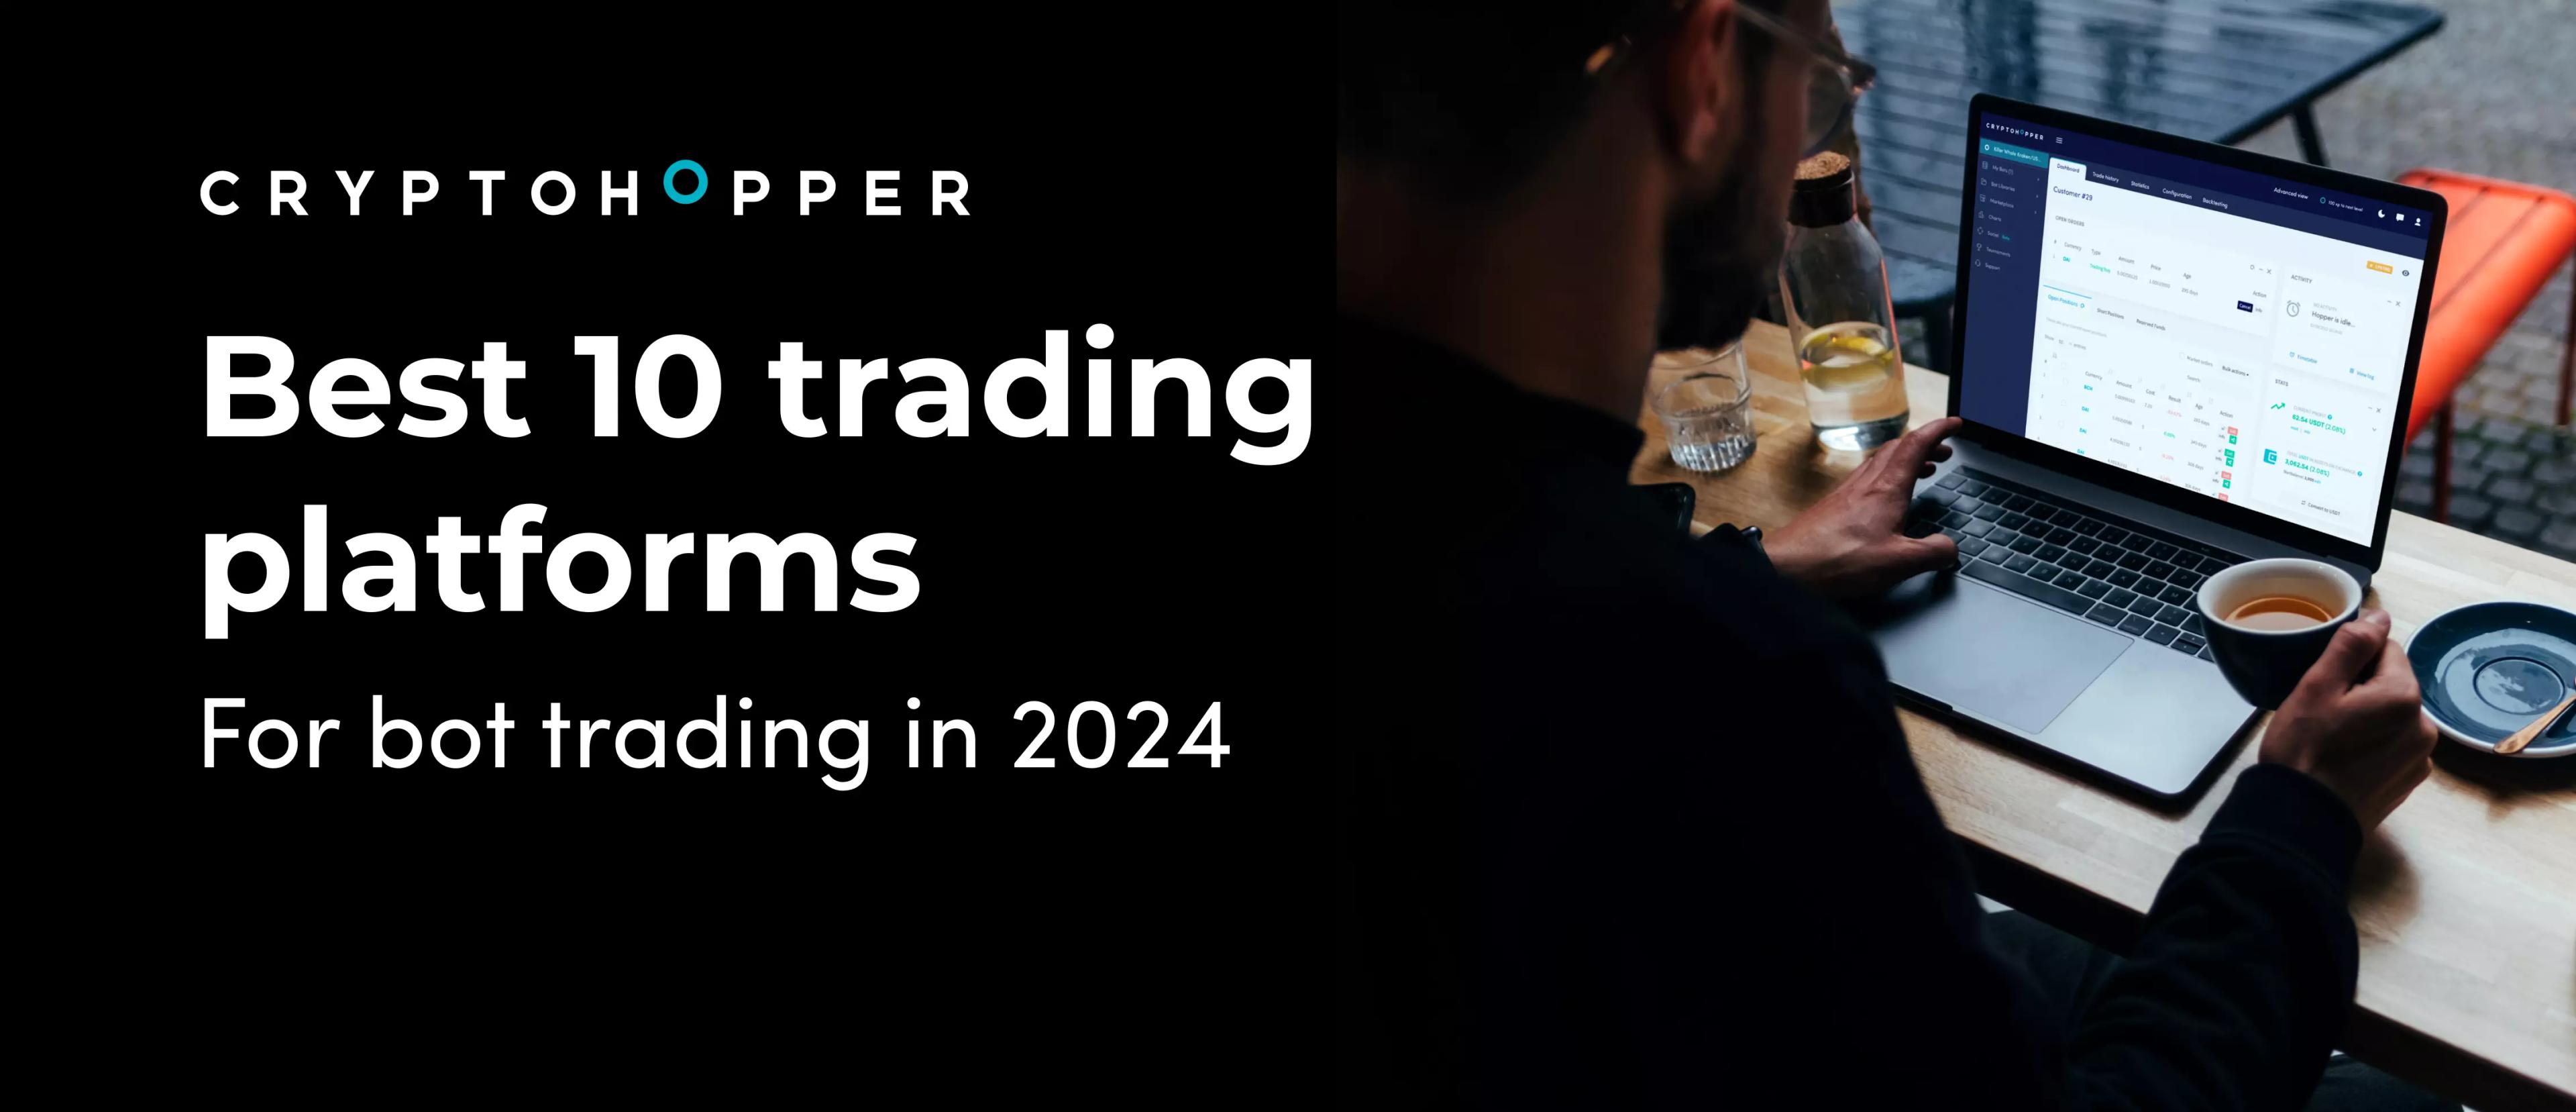 Best 10 trading platforms for bot trading in 2024